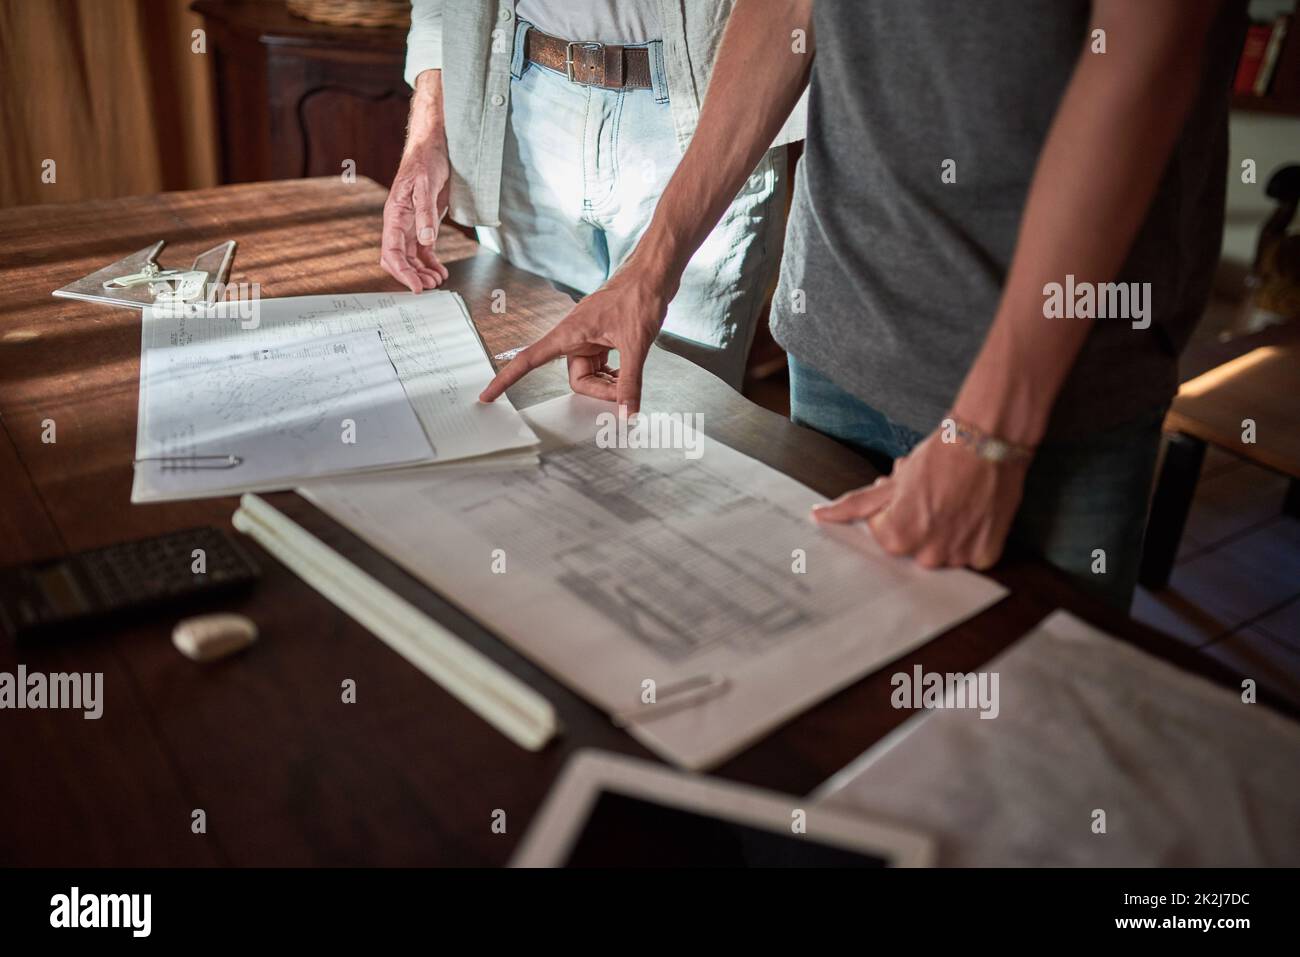 Going over the specs together. Shot of an unidentifiable father and his son working on a design for their family business at home. Stock Photo